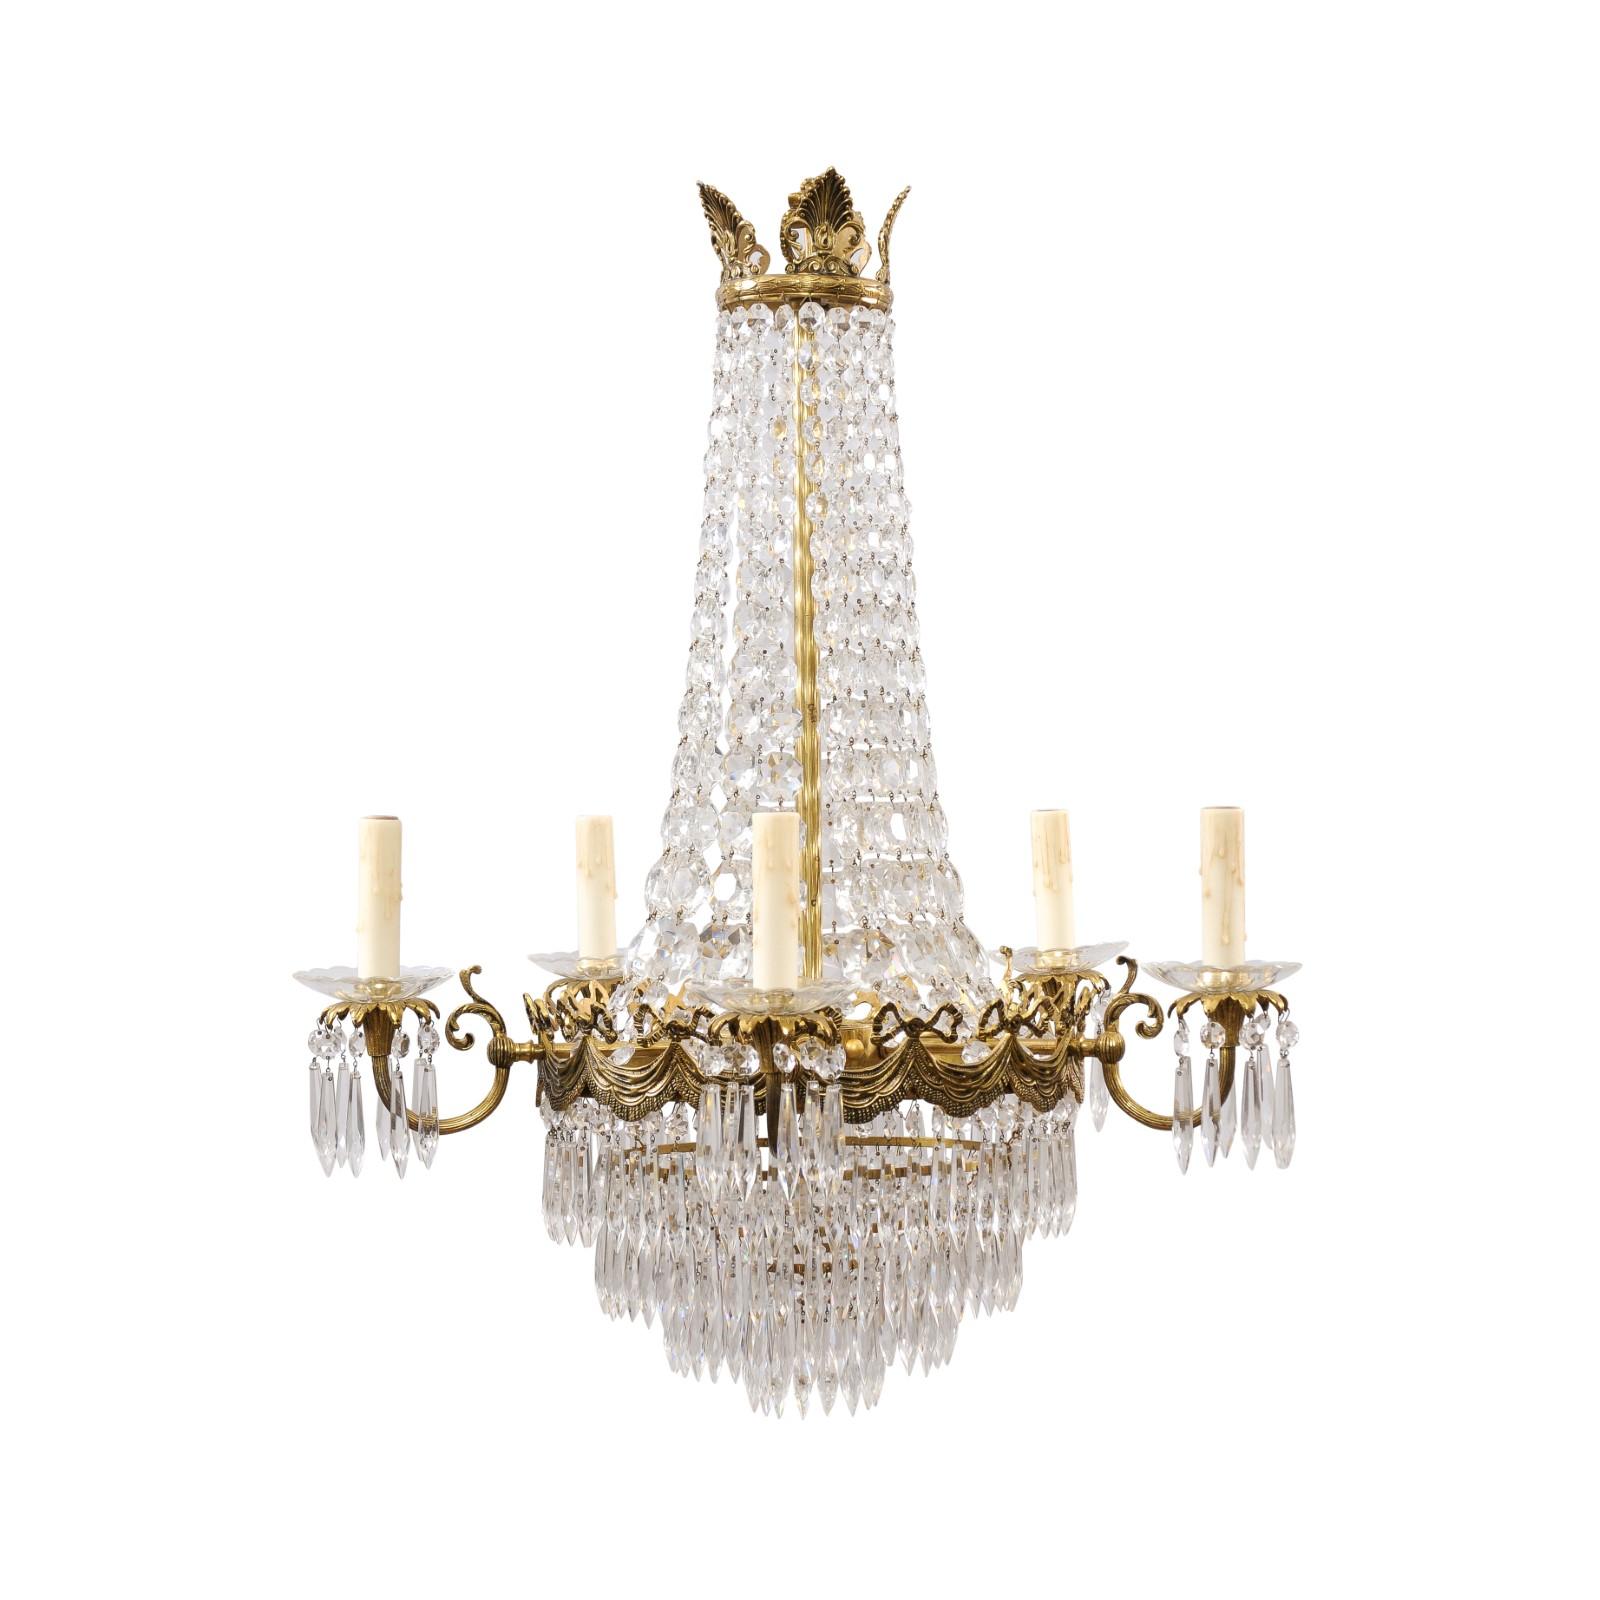 A French Belle Époque crystal and bronze five-light basket chandelier from circa 1890 with palmette and swag motifs. This captivating French Belle Époque chandelier, dating back to circa 1890, is a masterpiece of crystal and bronze, elegantly